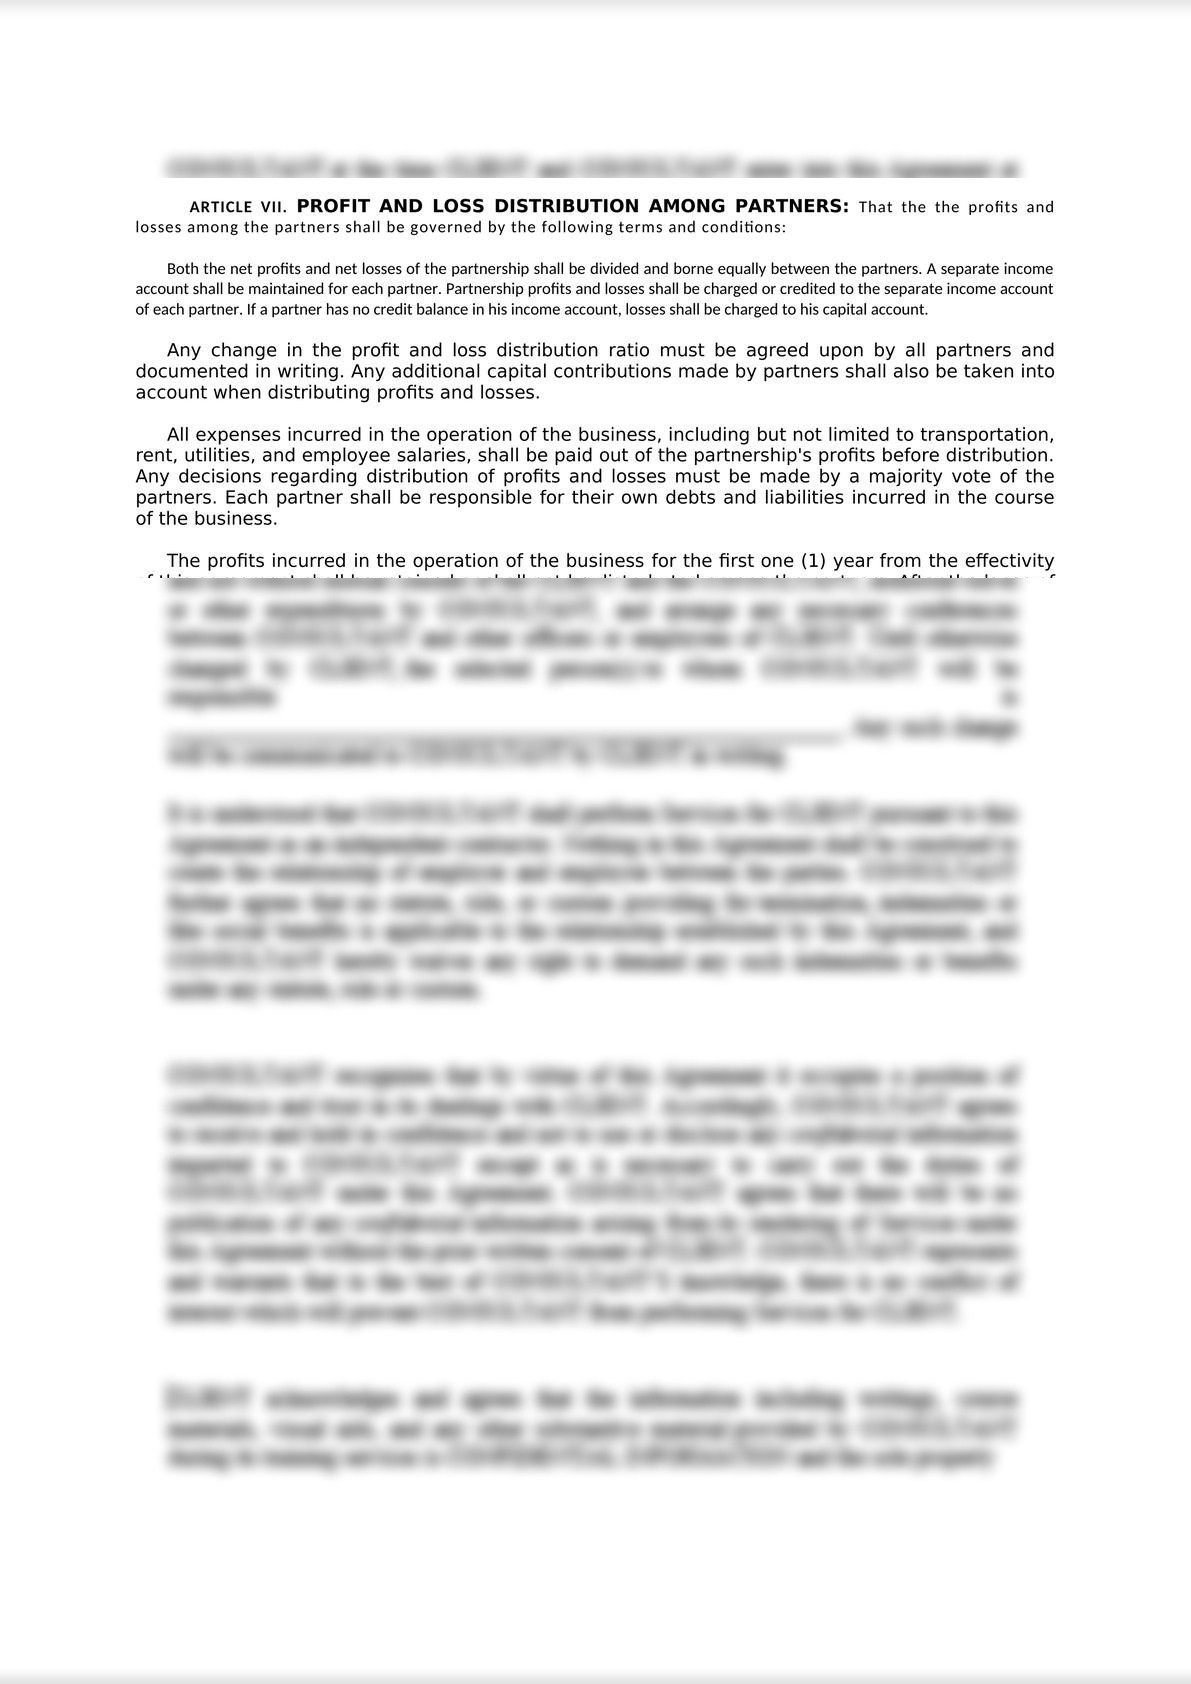 Articles of General Partnership (Agreement Contract)-1